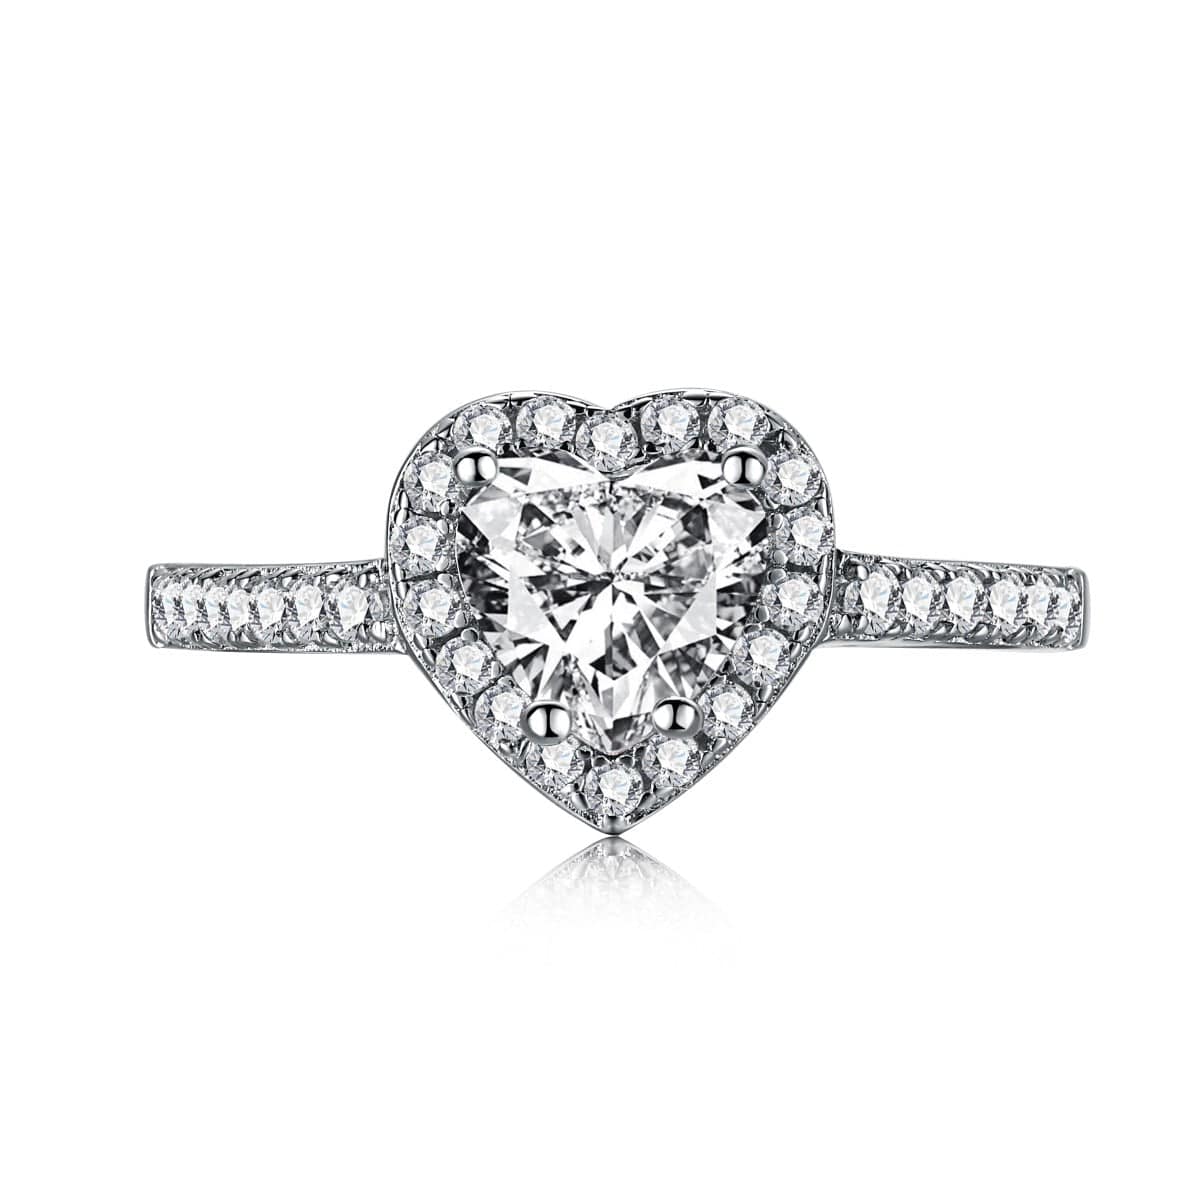 2 ct - Be Mine Heart Shaped Ring